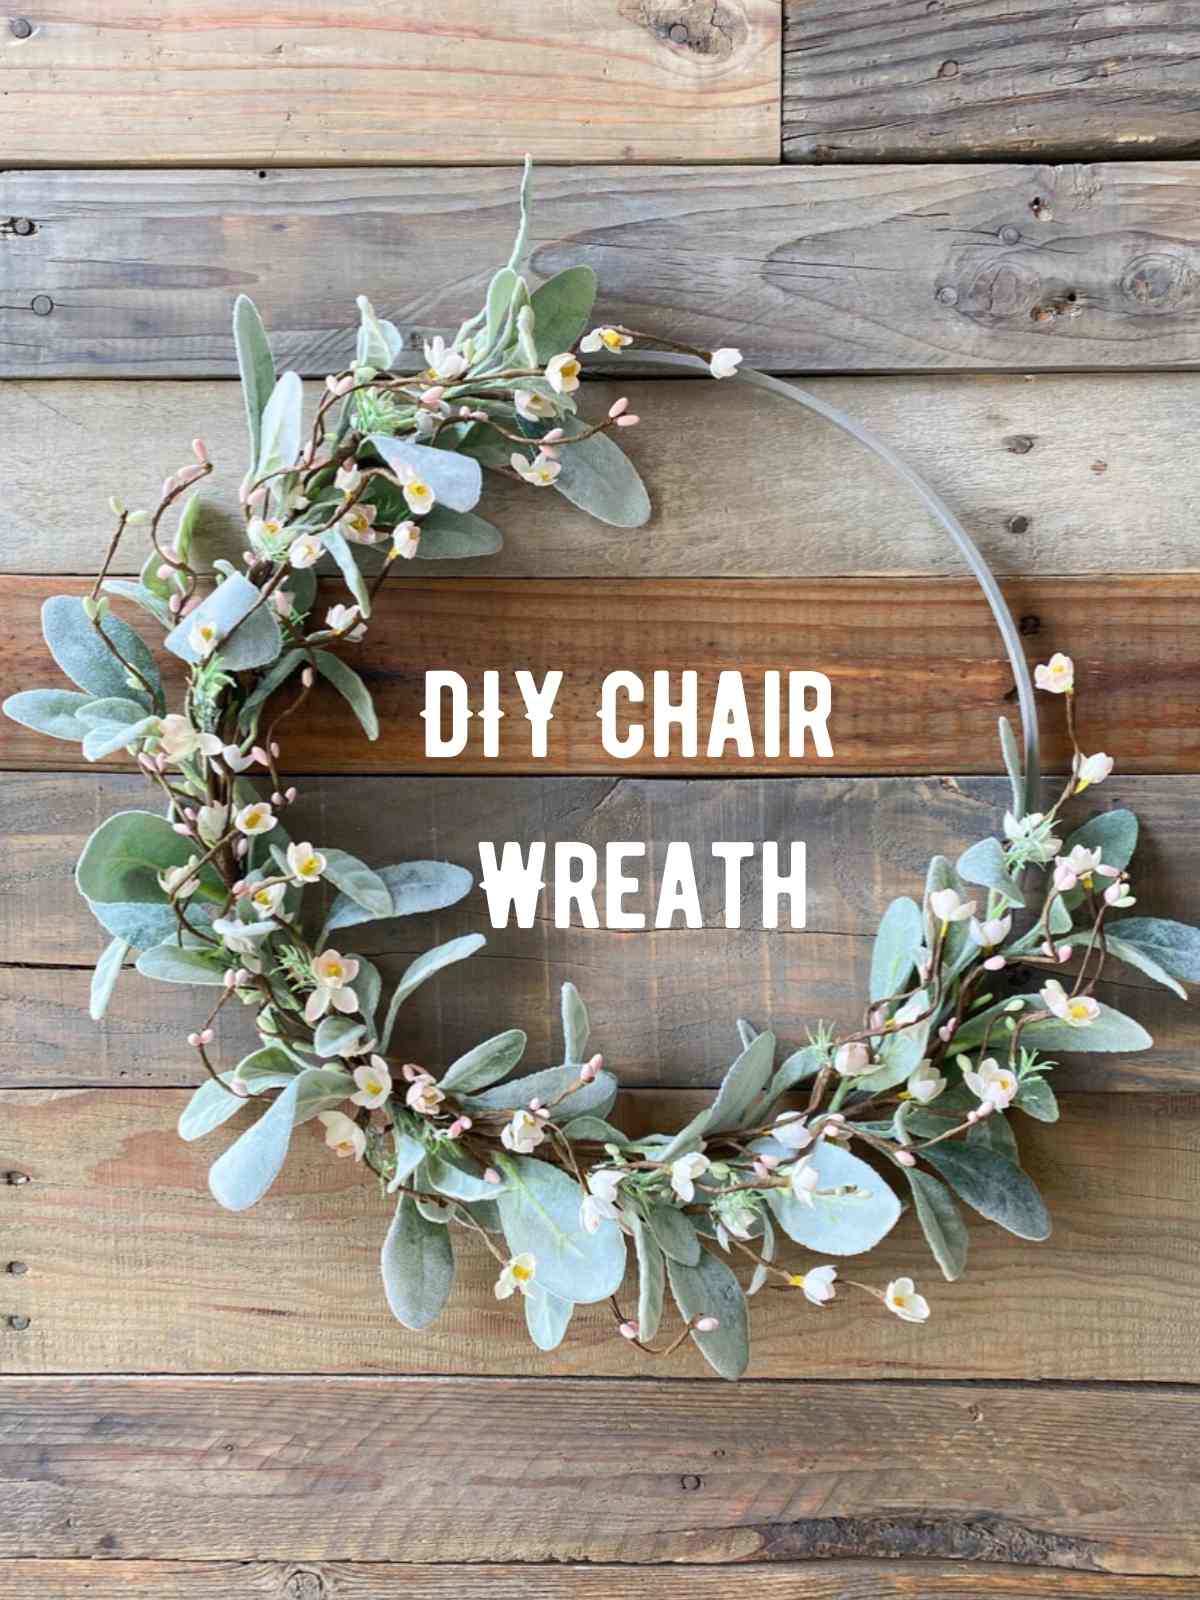 DIY Chair Wreath Instructions and supplies